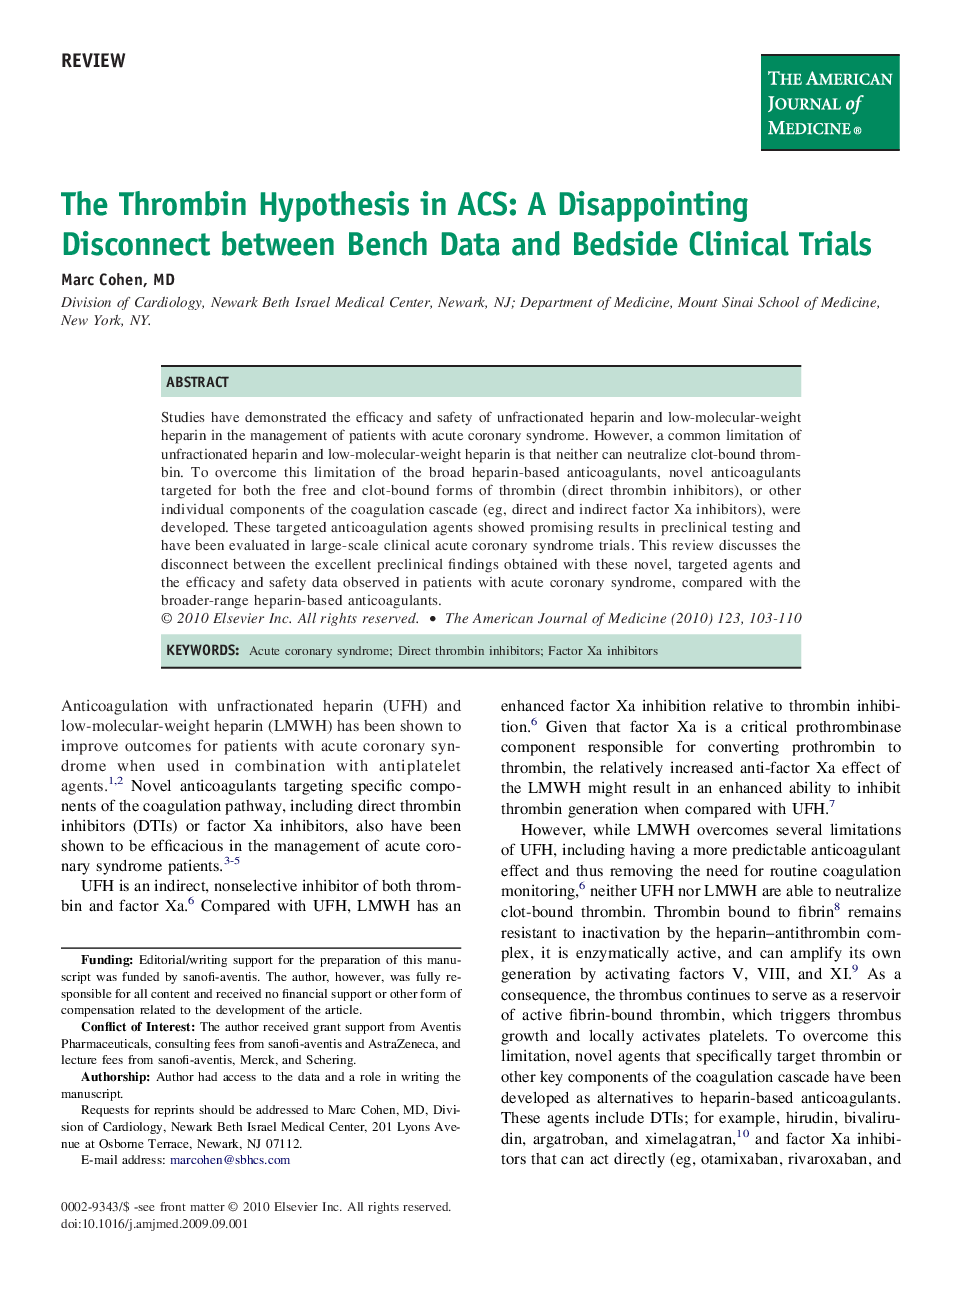 The Thrombin Hypothesis in ACS: A Disappointing Disconnect between Bench Data and Bedside Clinical Trials 